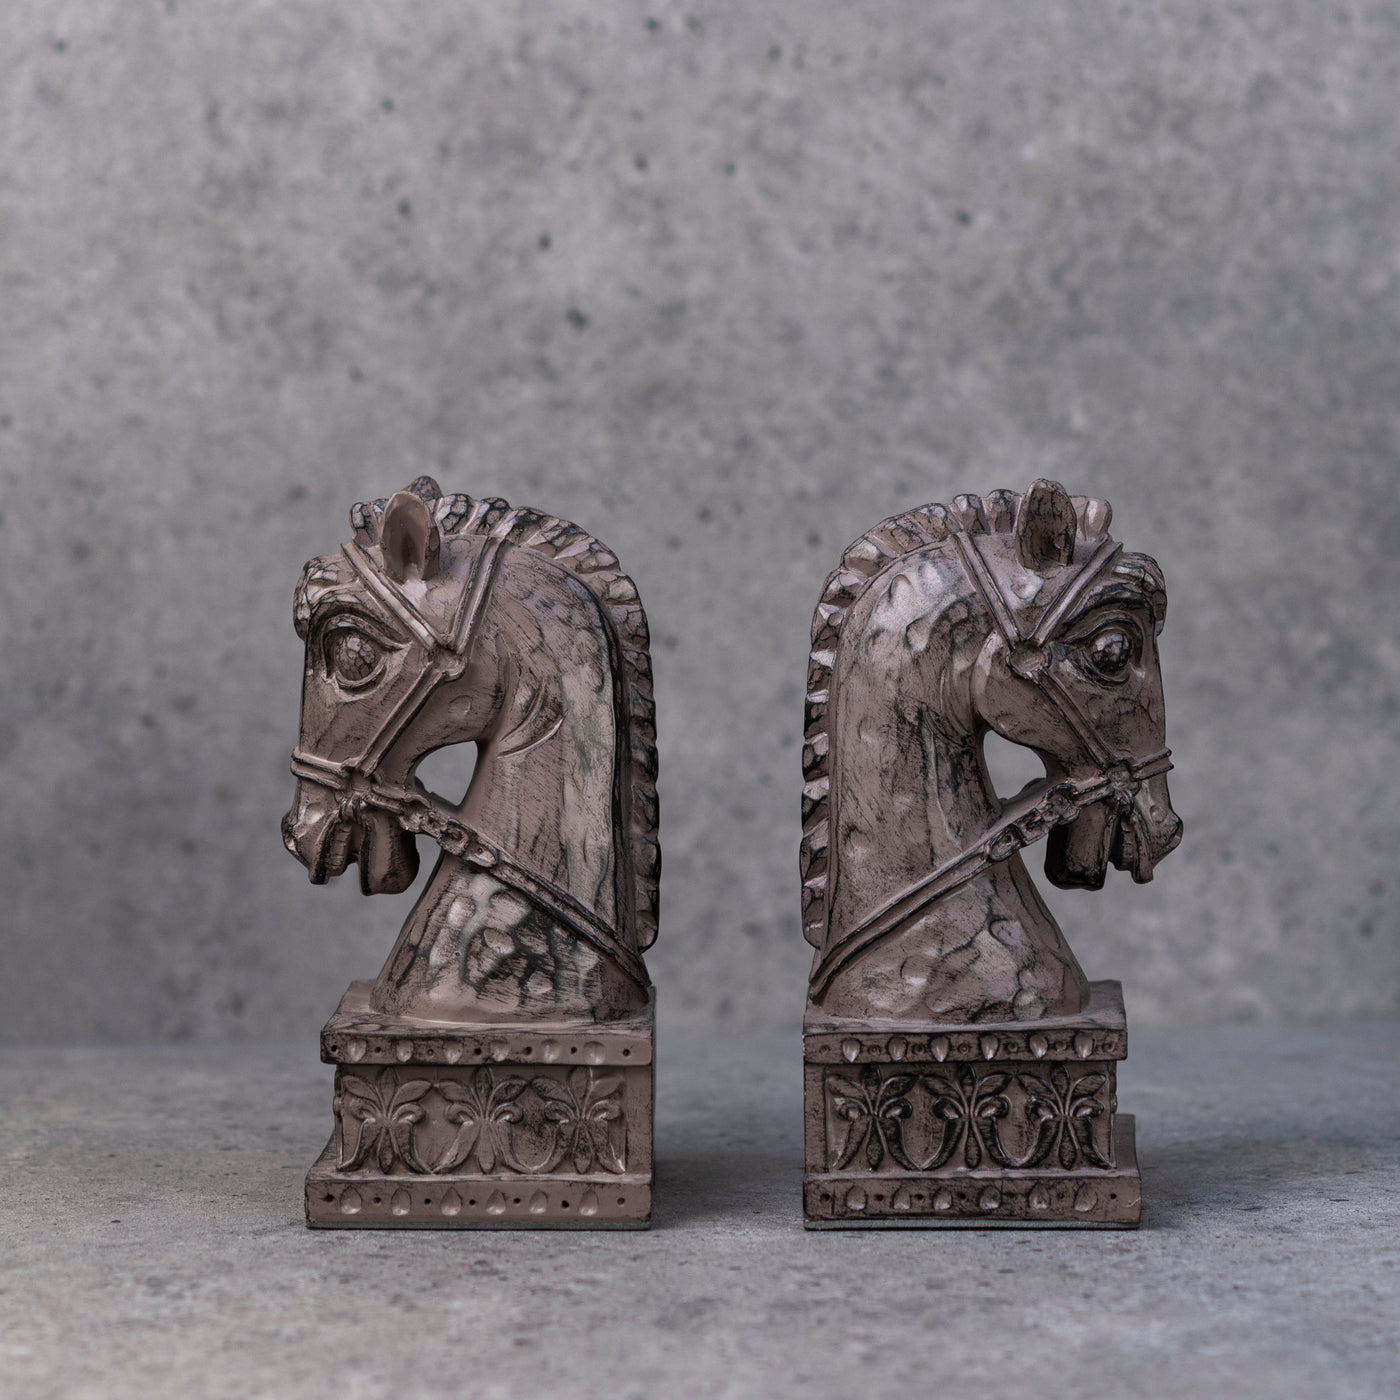 Decorative bookends by Home 360